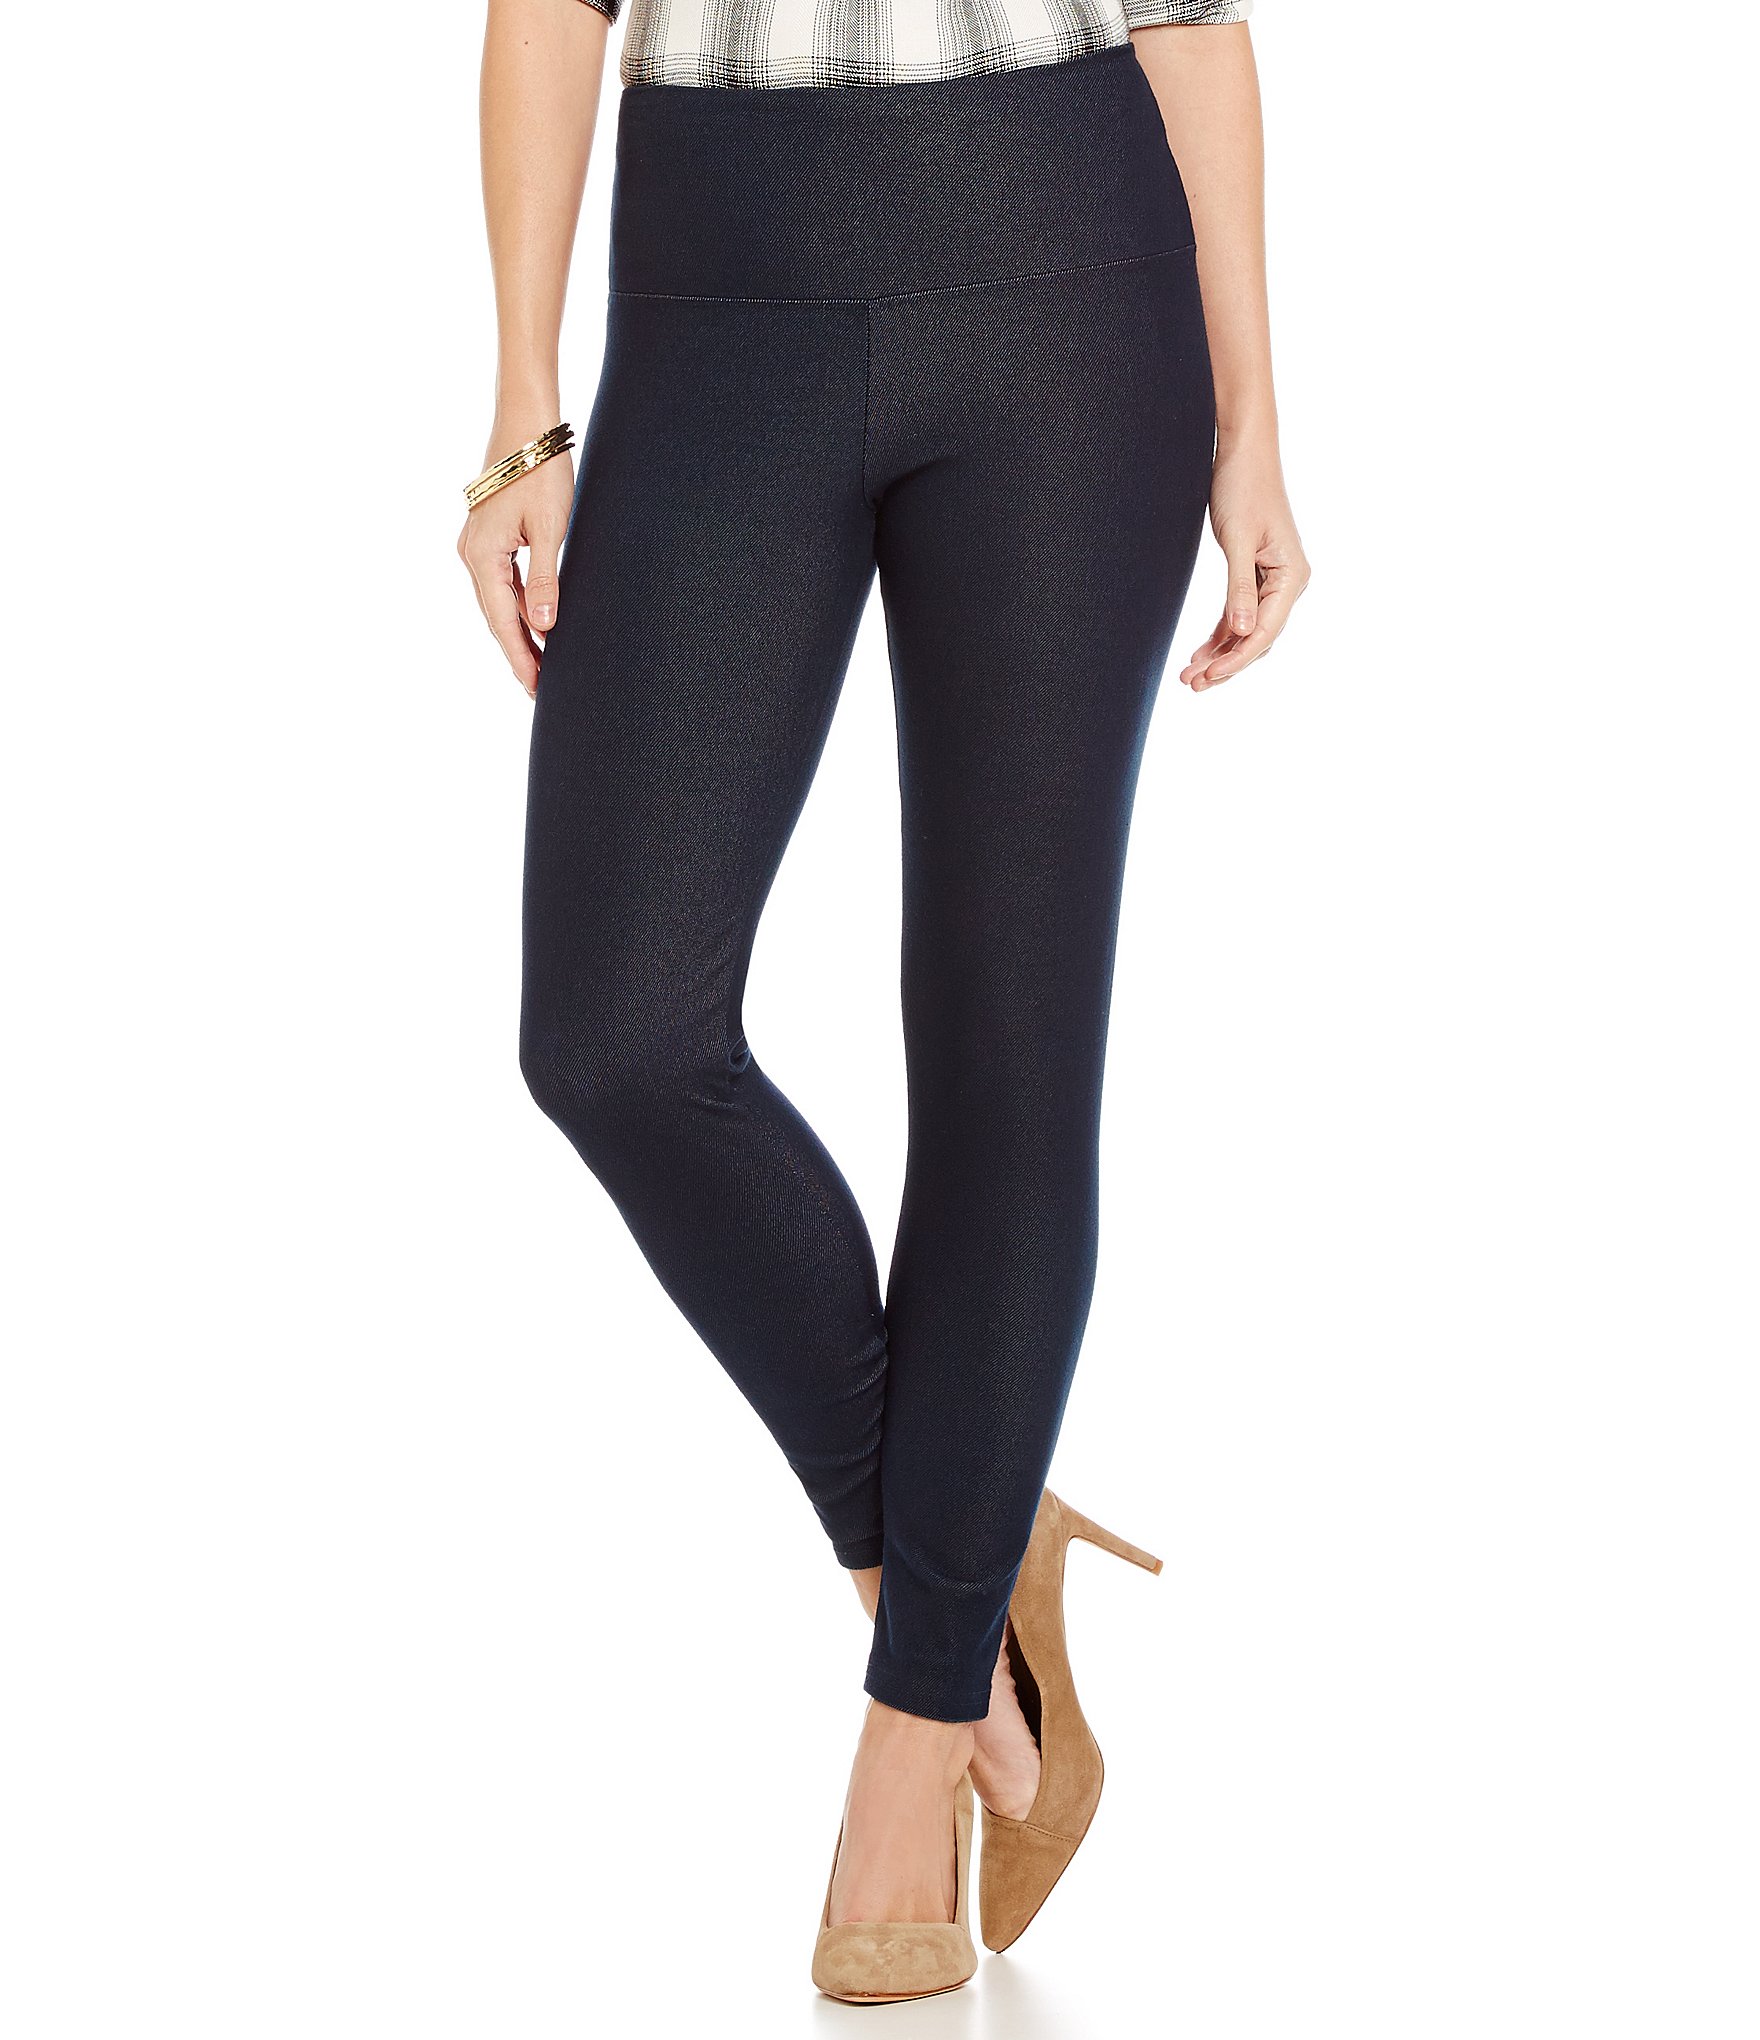 Best Stores To Get Leggings In Nc